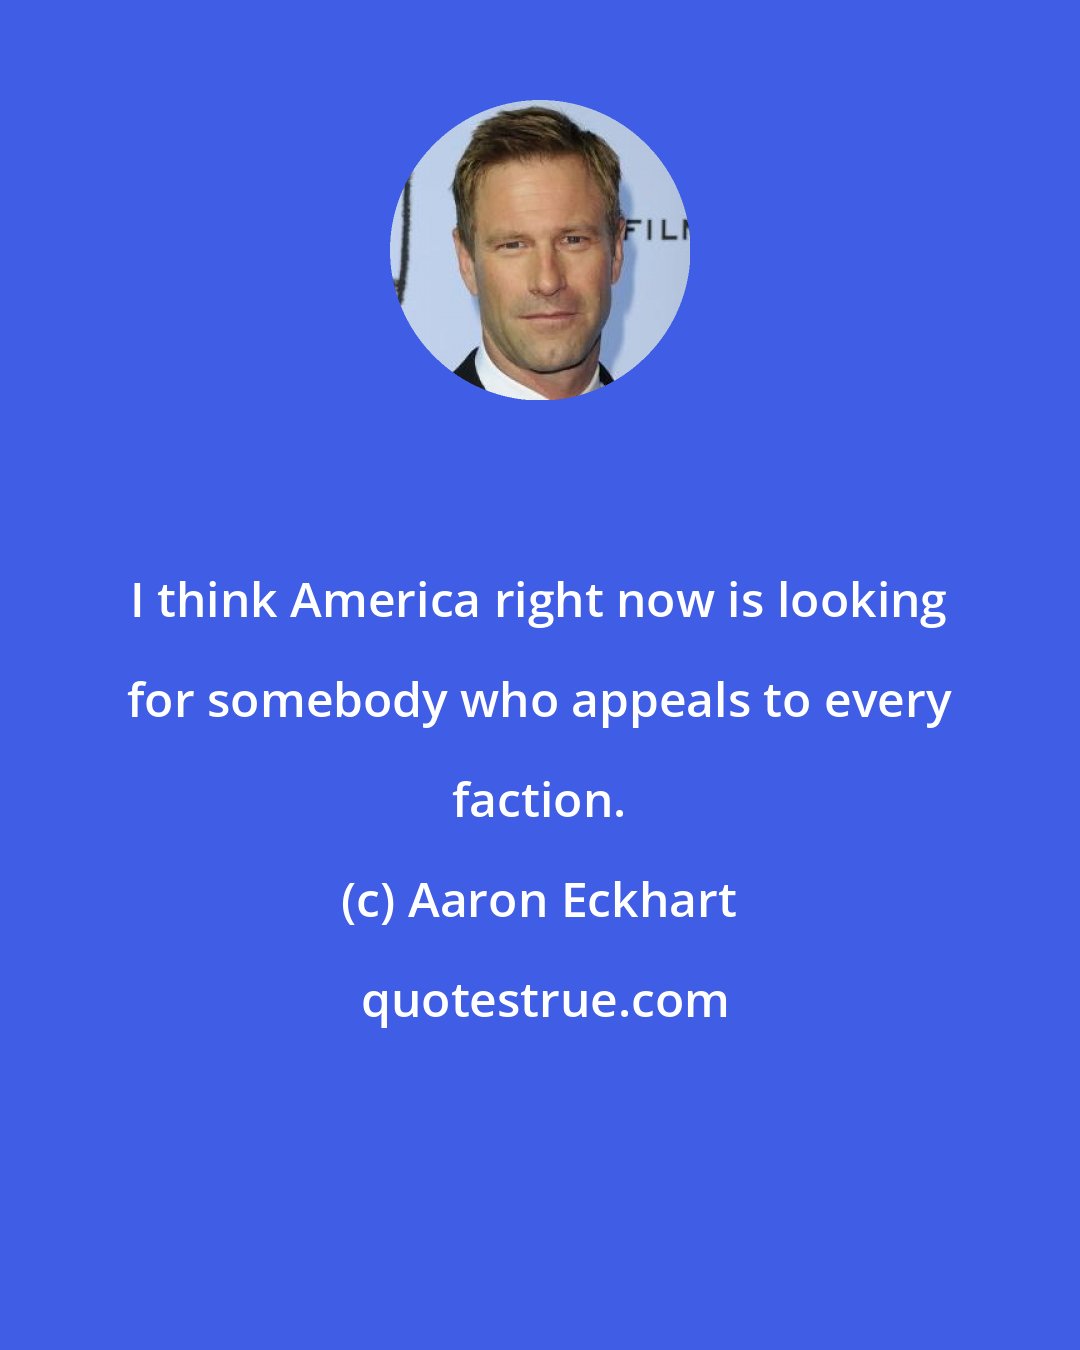 Aaron Eckhart: I think America right now is looking for somebody who appeals to every faction.